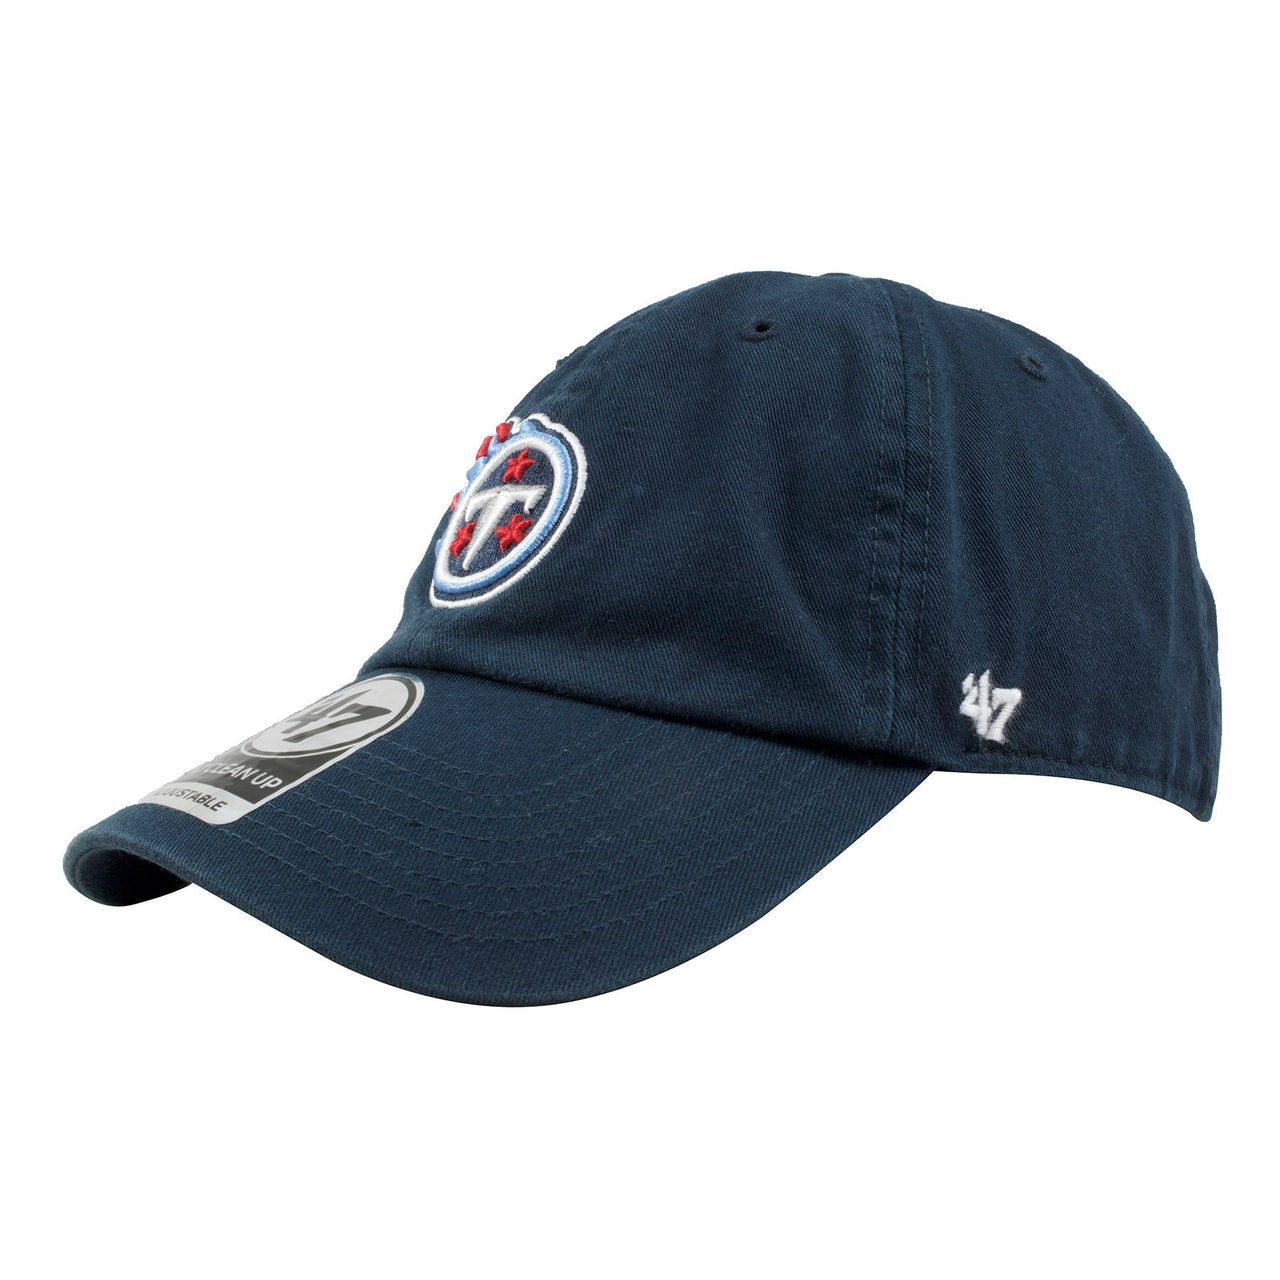 on the left side of the tennessee titans dad hat is a '47 brand logo embroidered in white